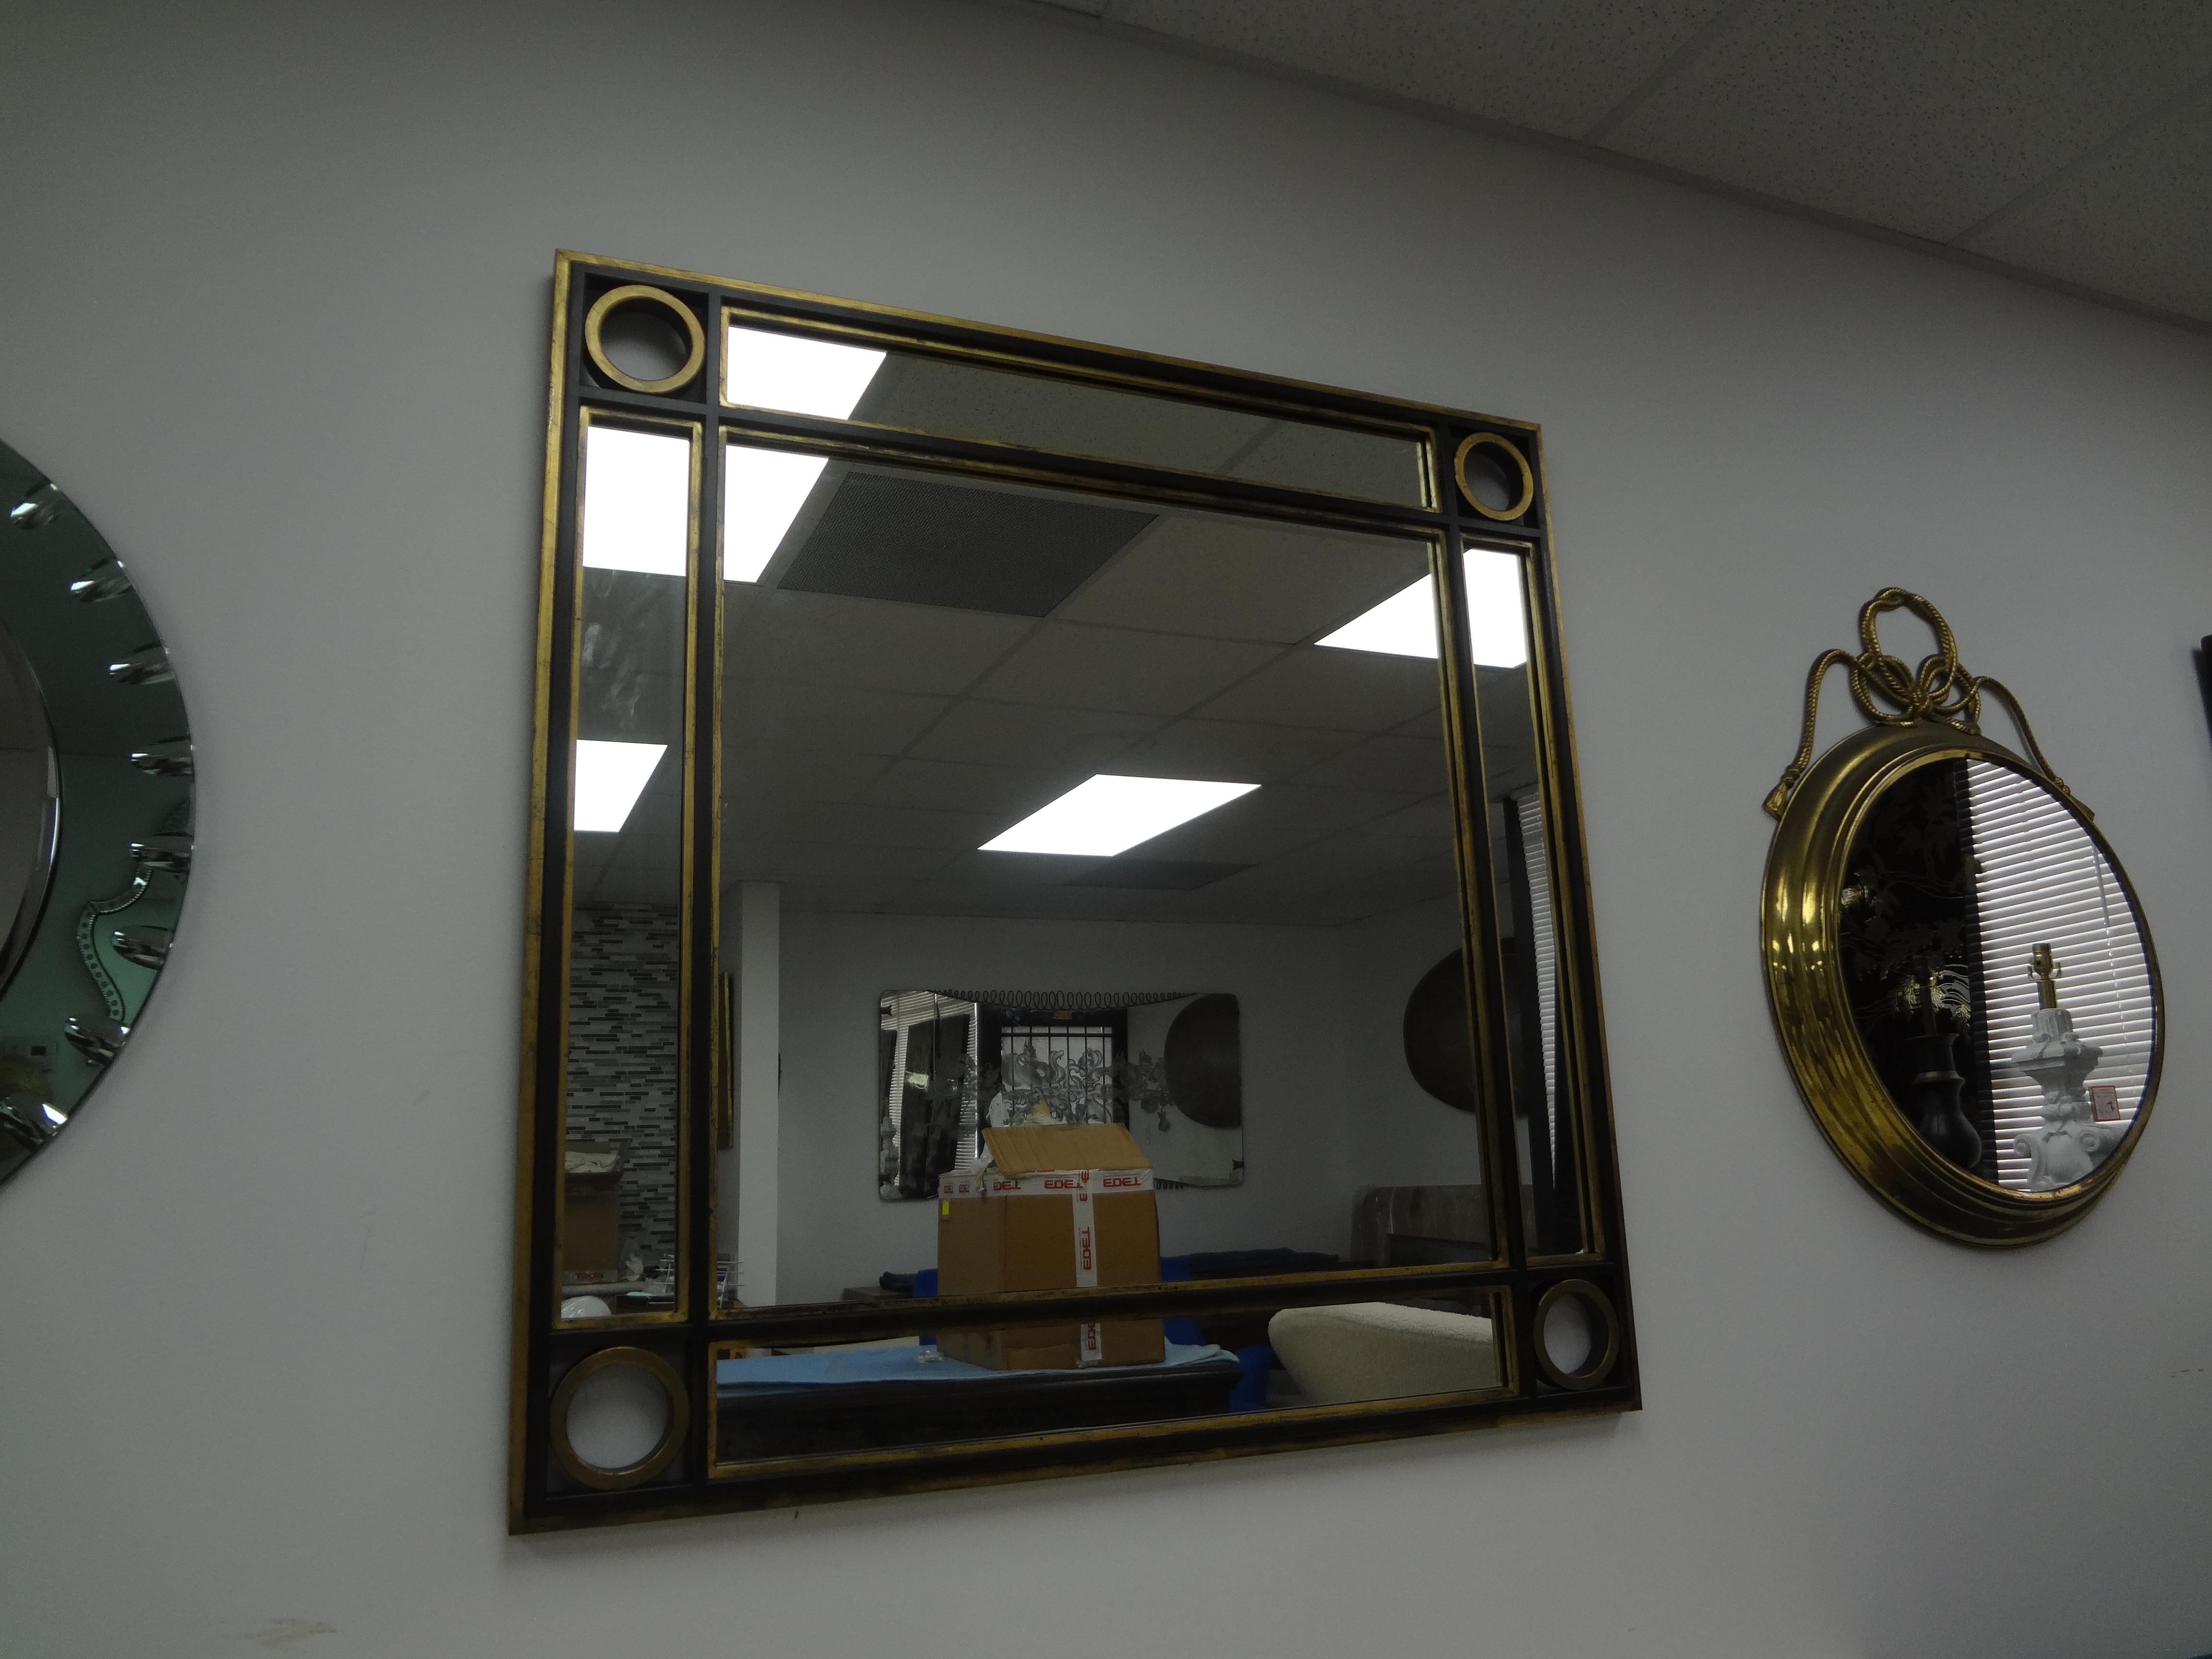 Vintage Italian Mid Century Square Iron Mirror.
Our handsome large Italian Hollywood Regency mirror was executed in wrought iron painted black and gilt with divided mirror perimeter.
A perfect mirror where a square mirror fits the bill!
Chic and